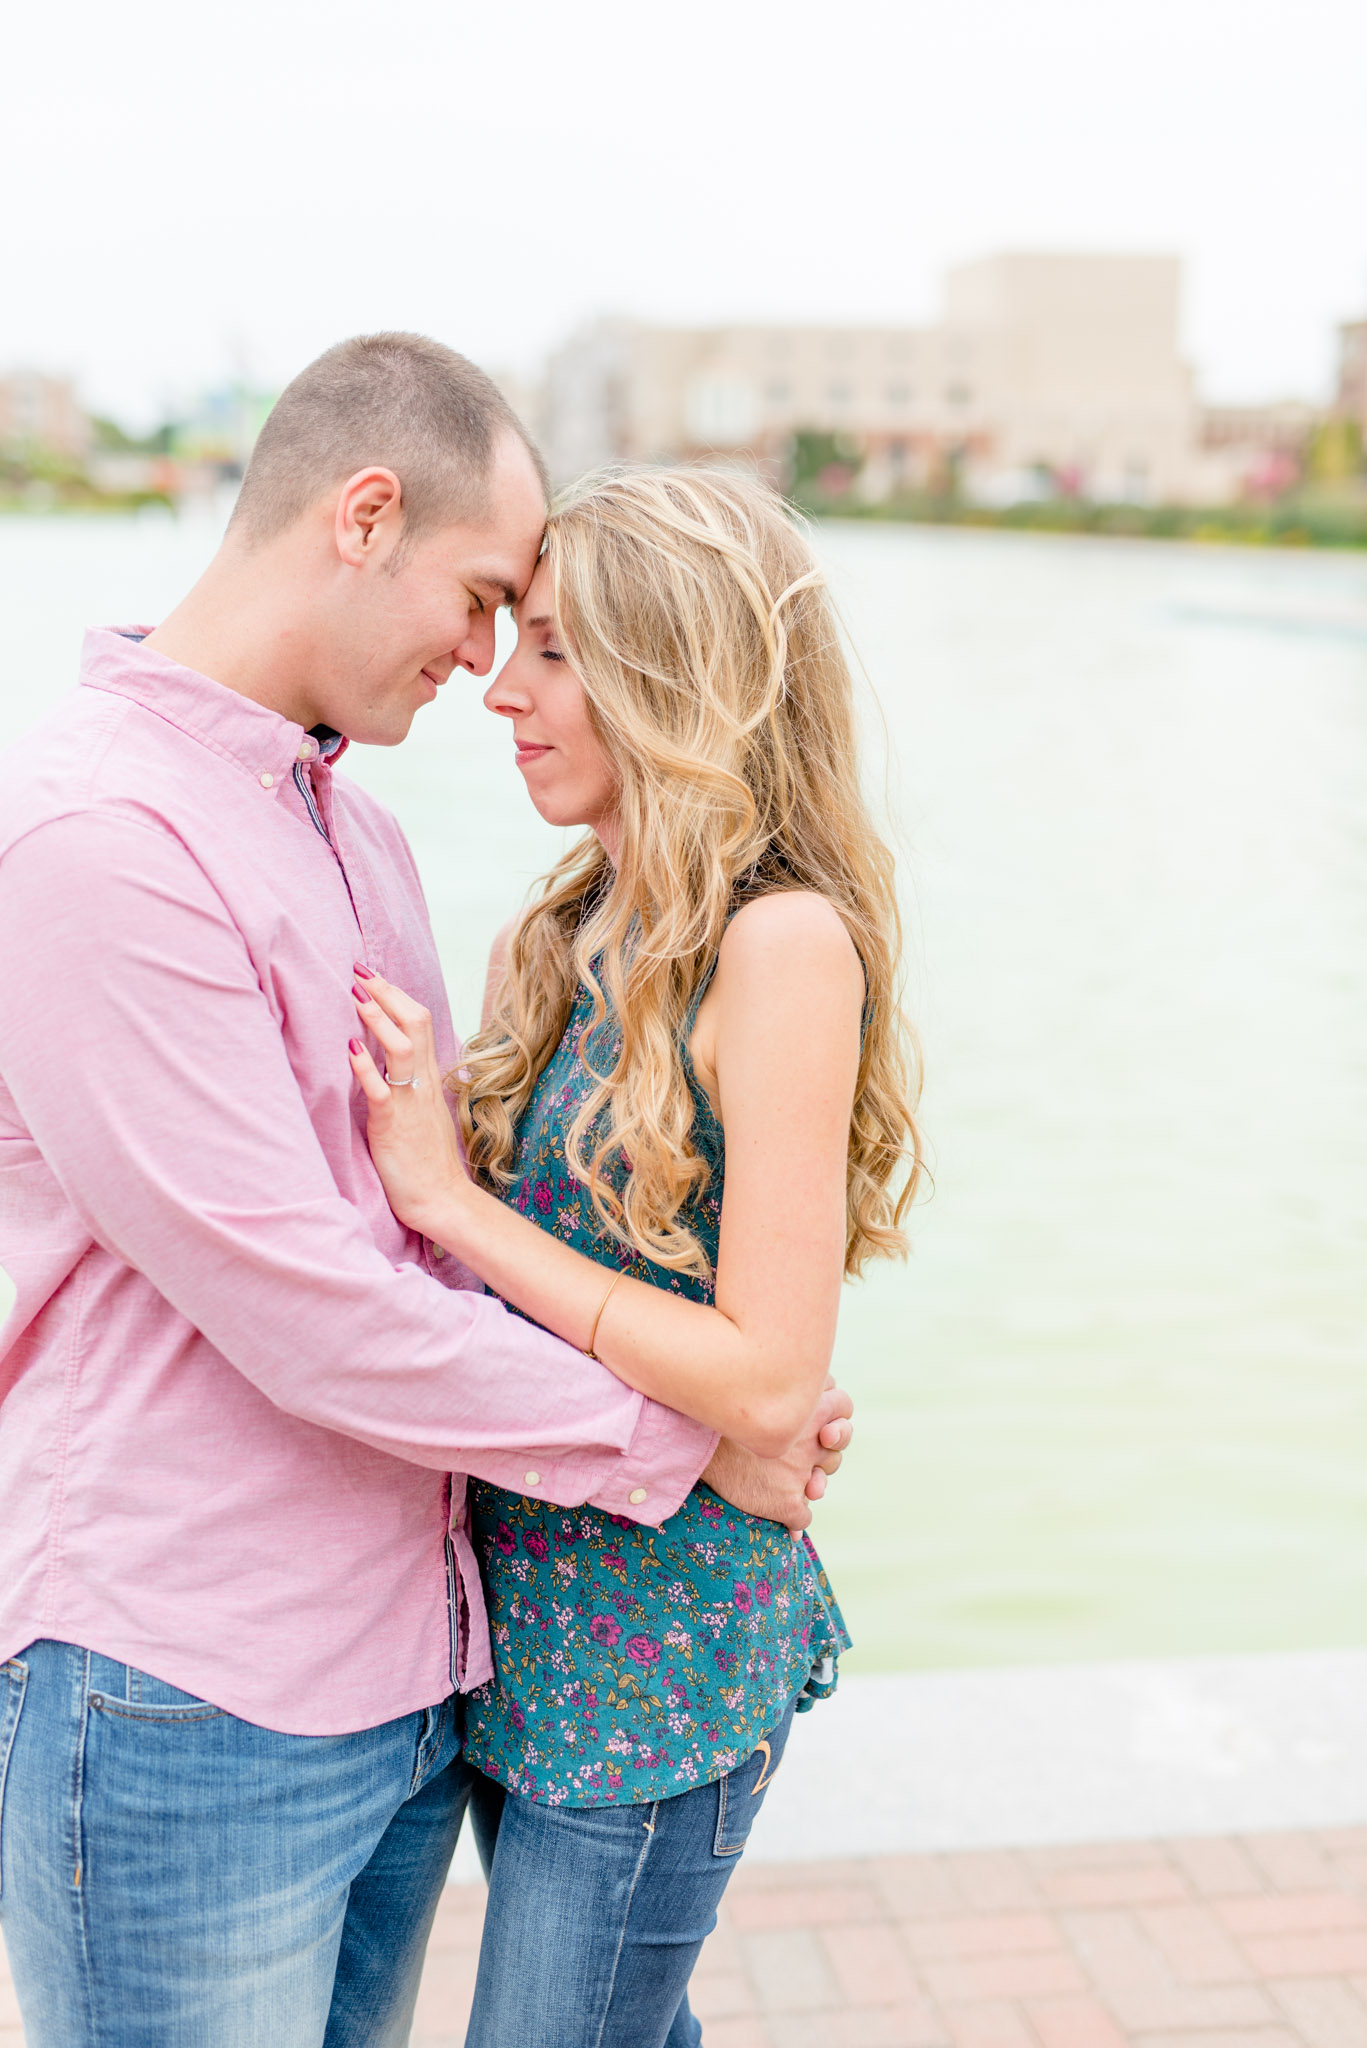 Engaged couple touch foreheads in front of reflecting pool.